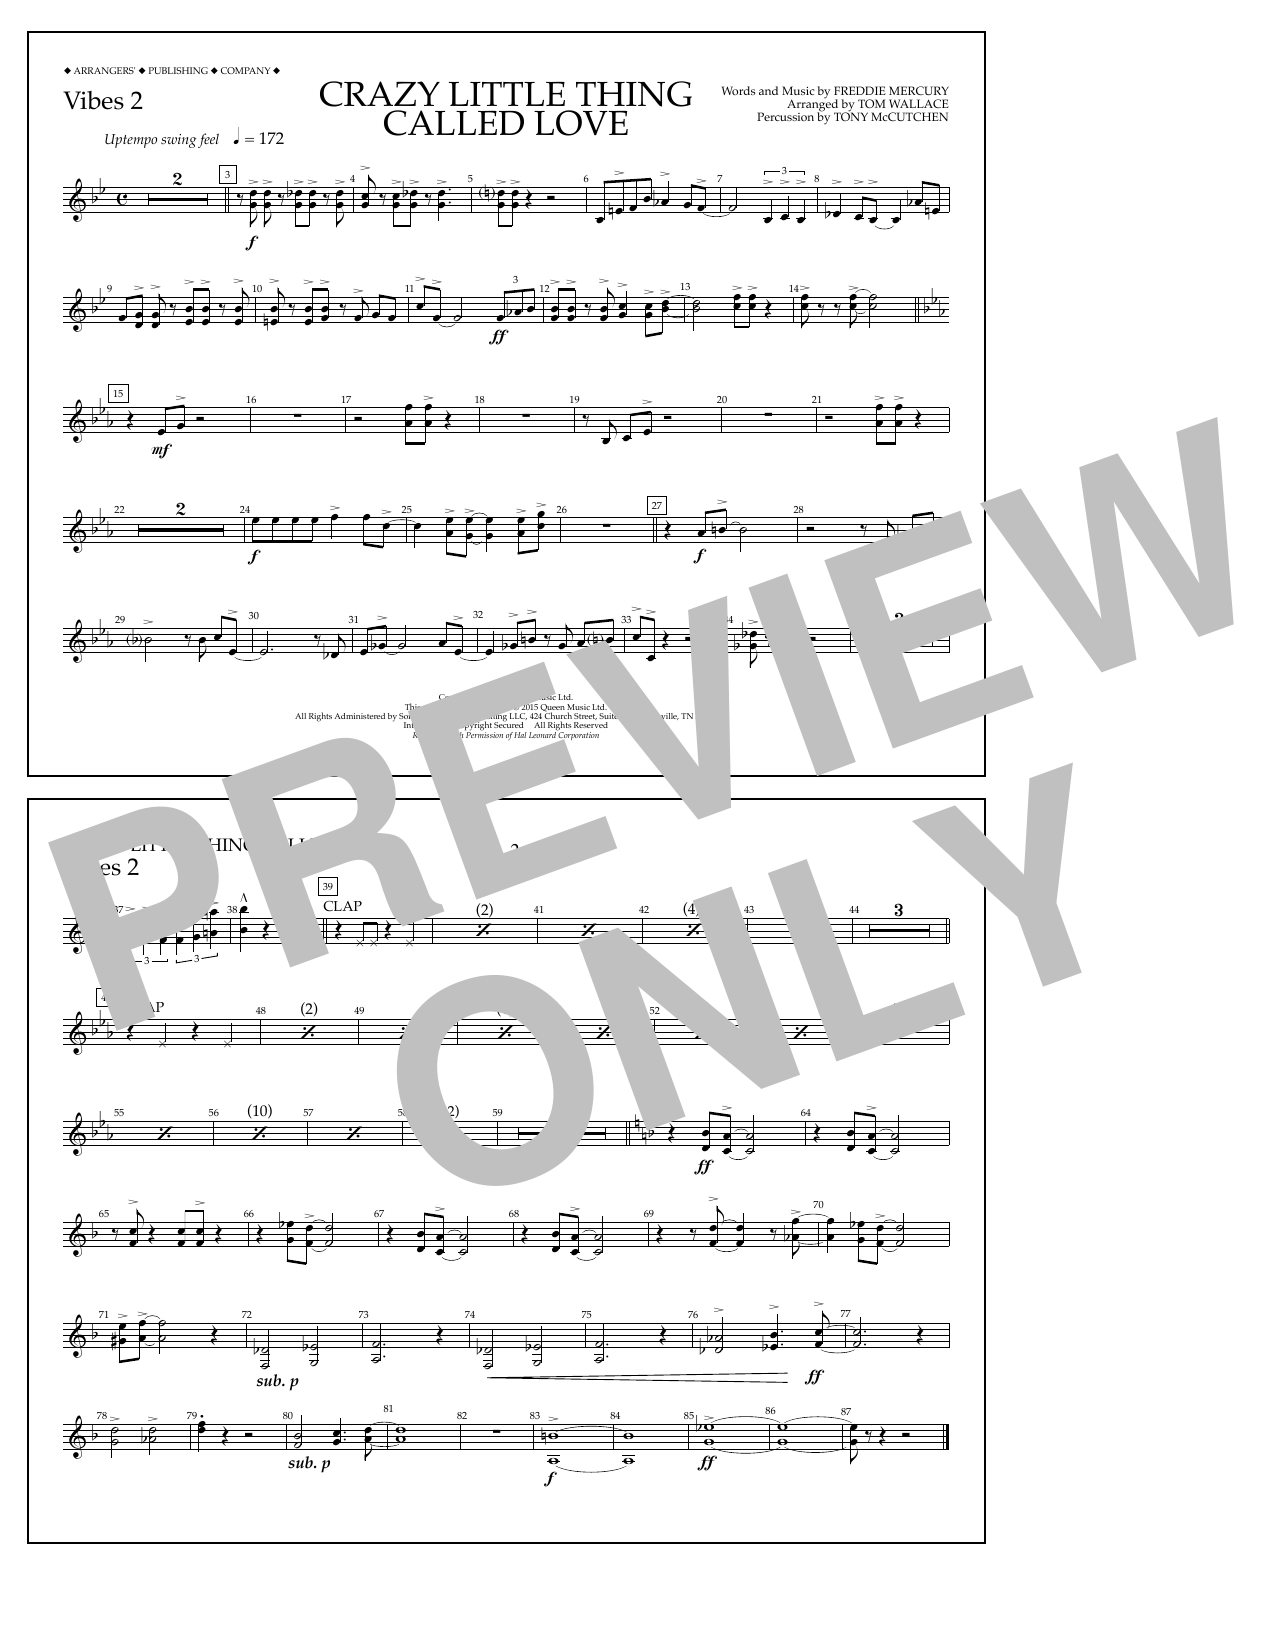 Download Tom Wallace Crazy Little Thing Called Love - Vibes Sheet Music